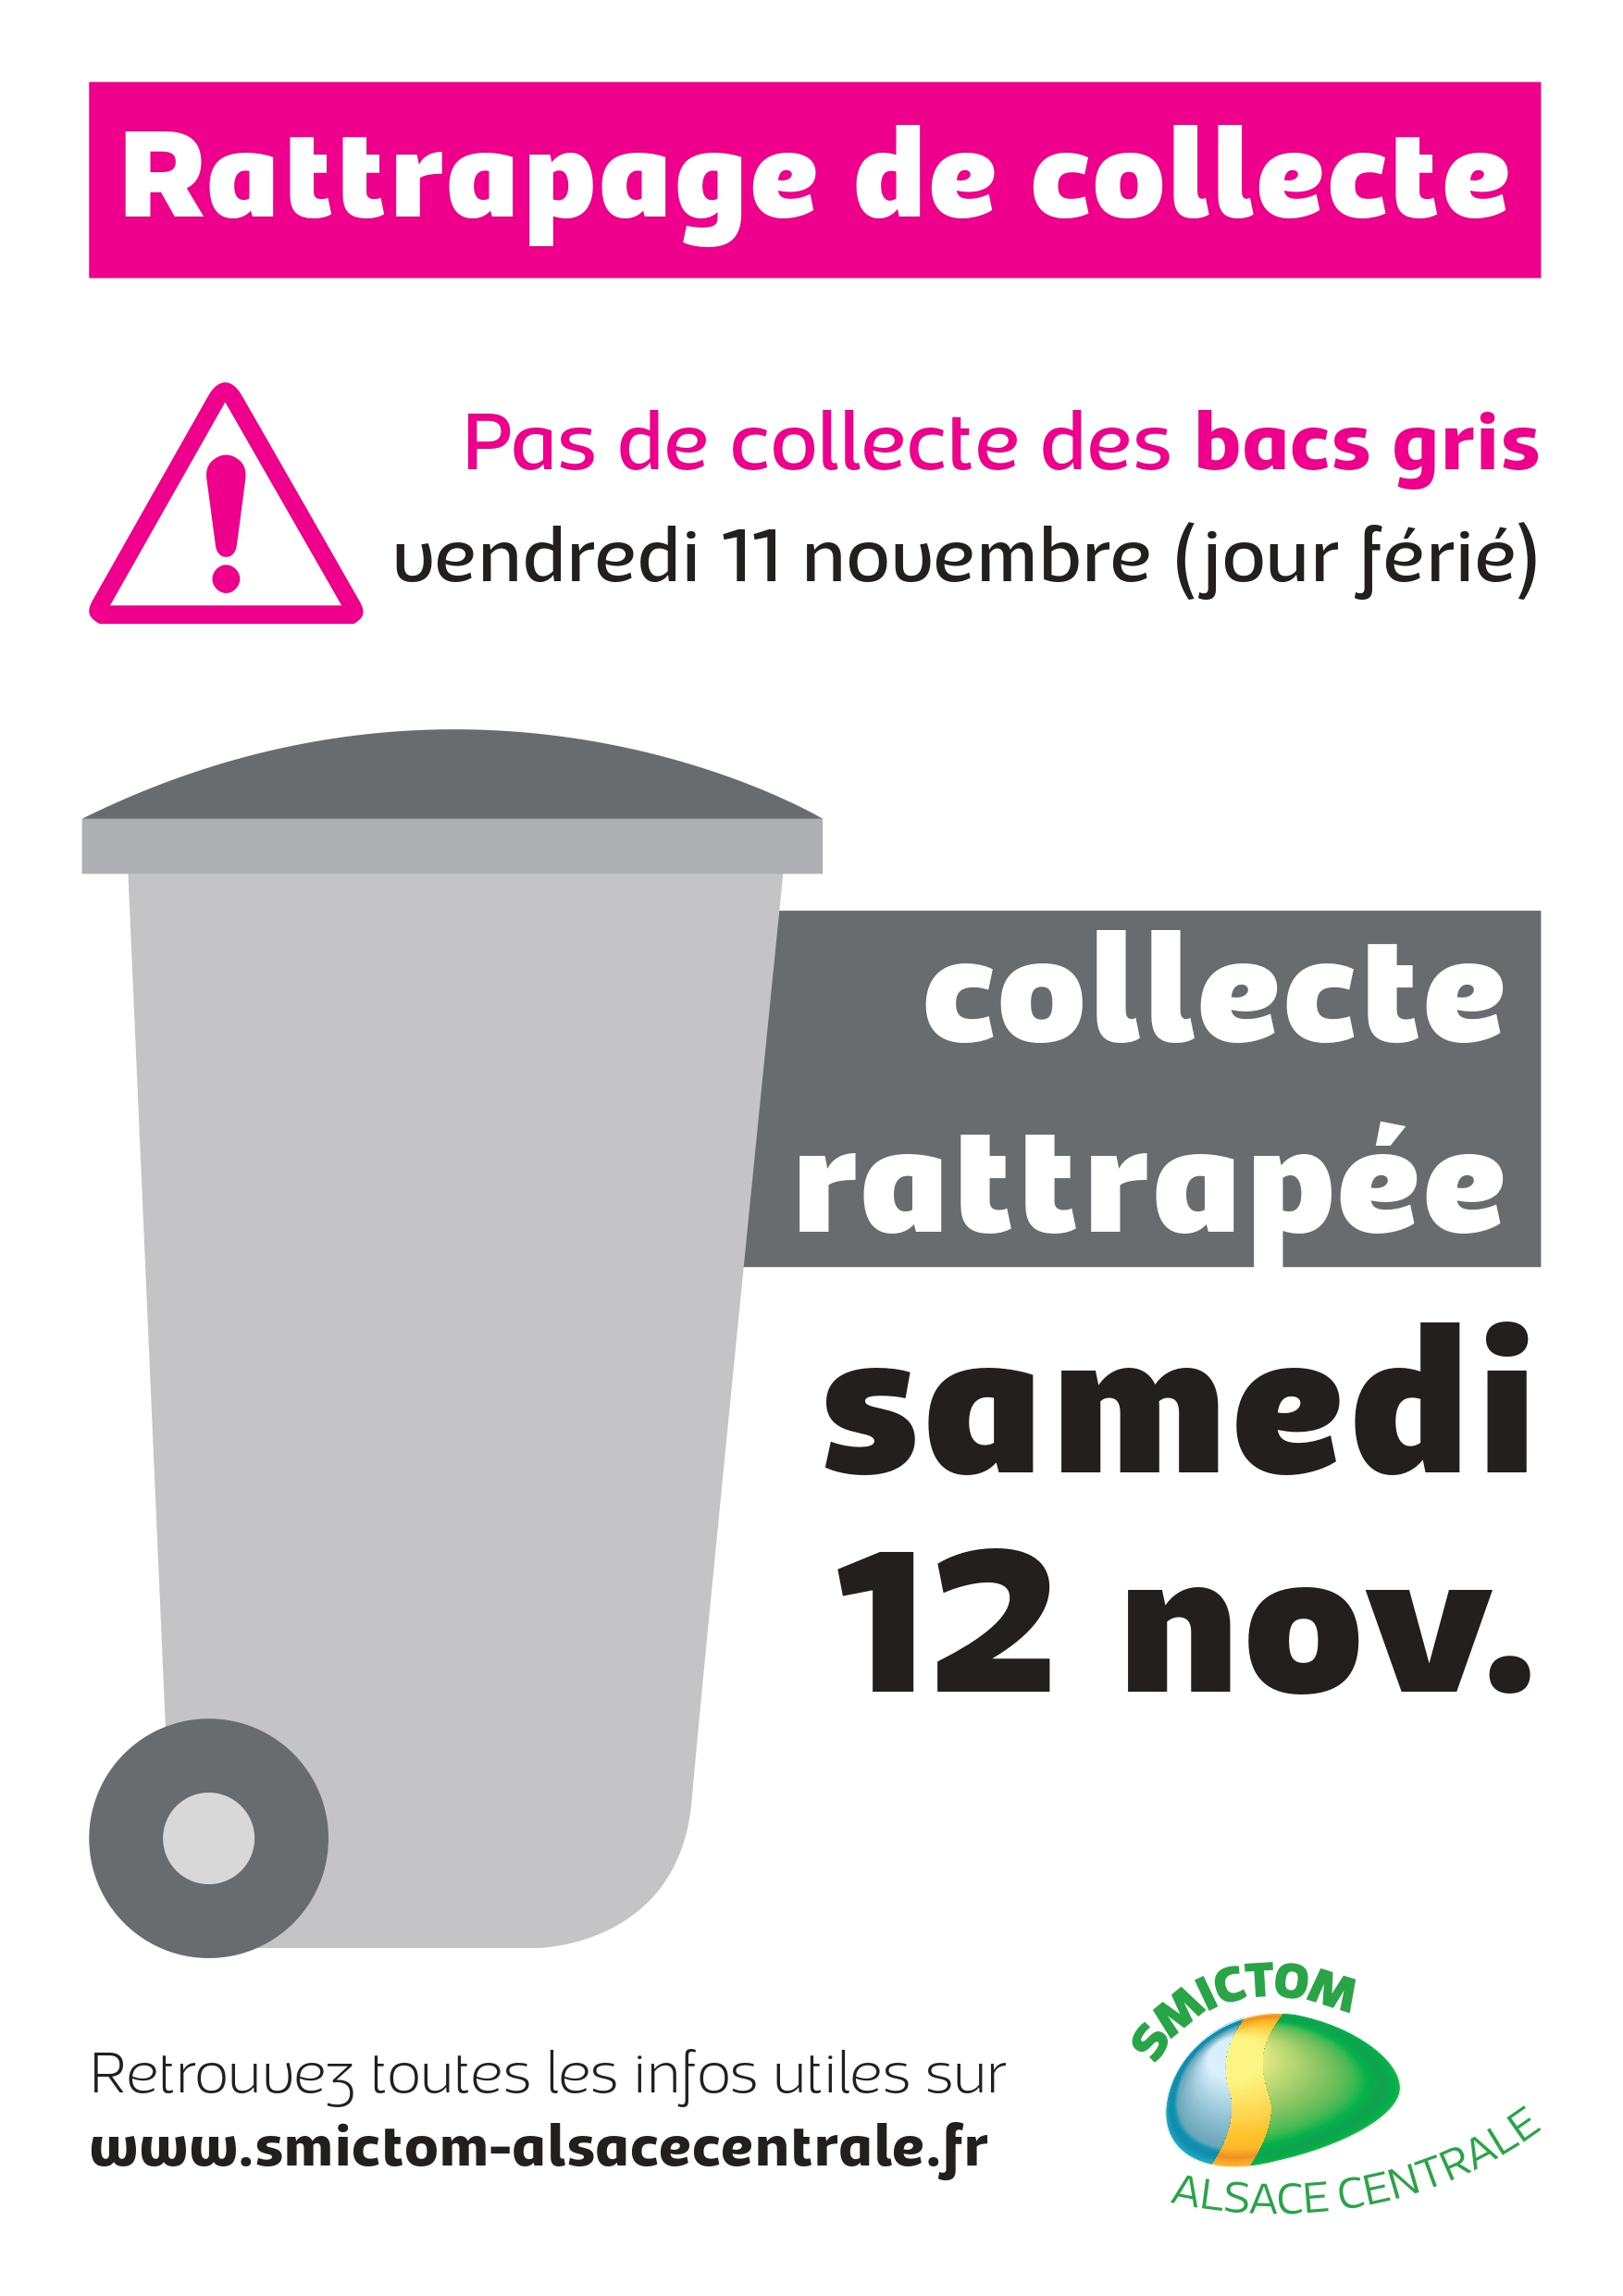 Affiche rattrapage gris 11 novembre_pages-to-jpg-0001 _1_.jpg